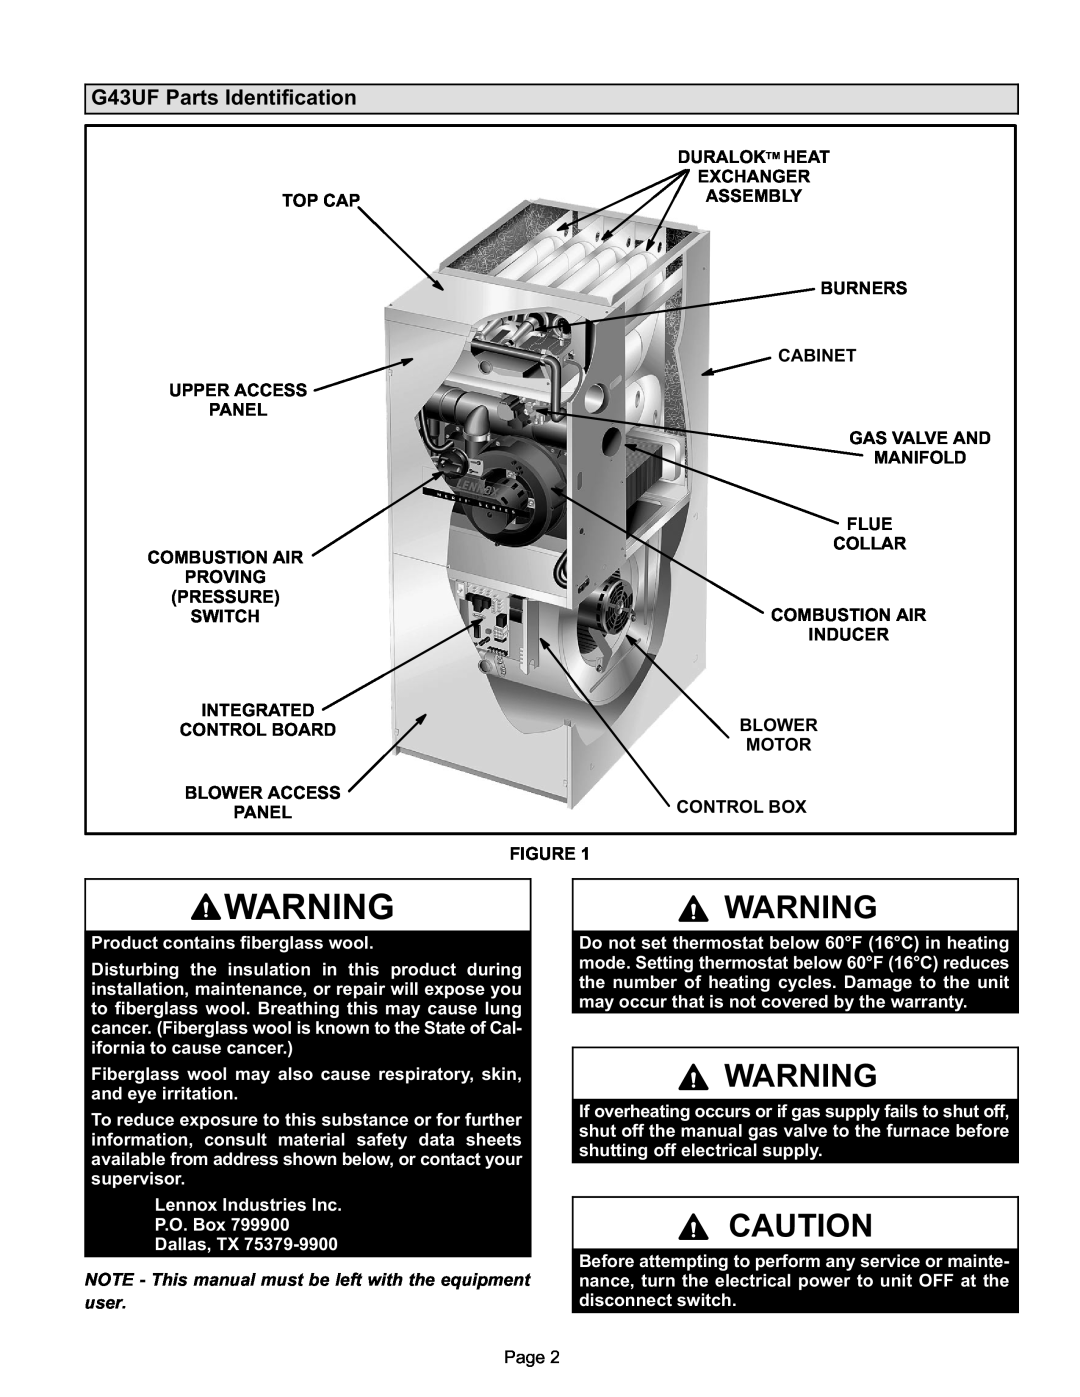 Lennox International Inc manual G43UF Parts Identification, Top Cap Upper Access Panel Combustion Air Proving, Page 